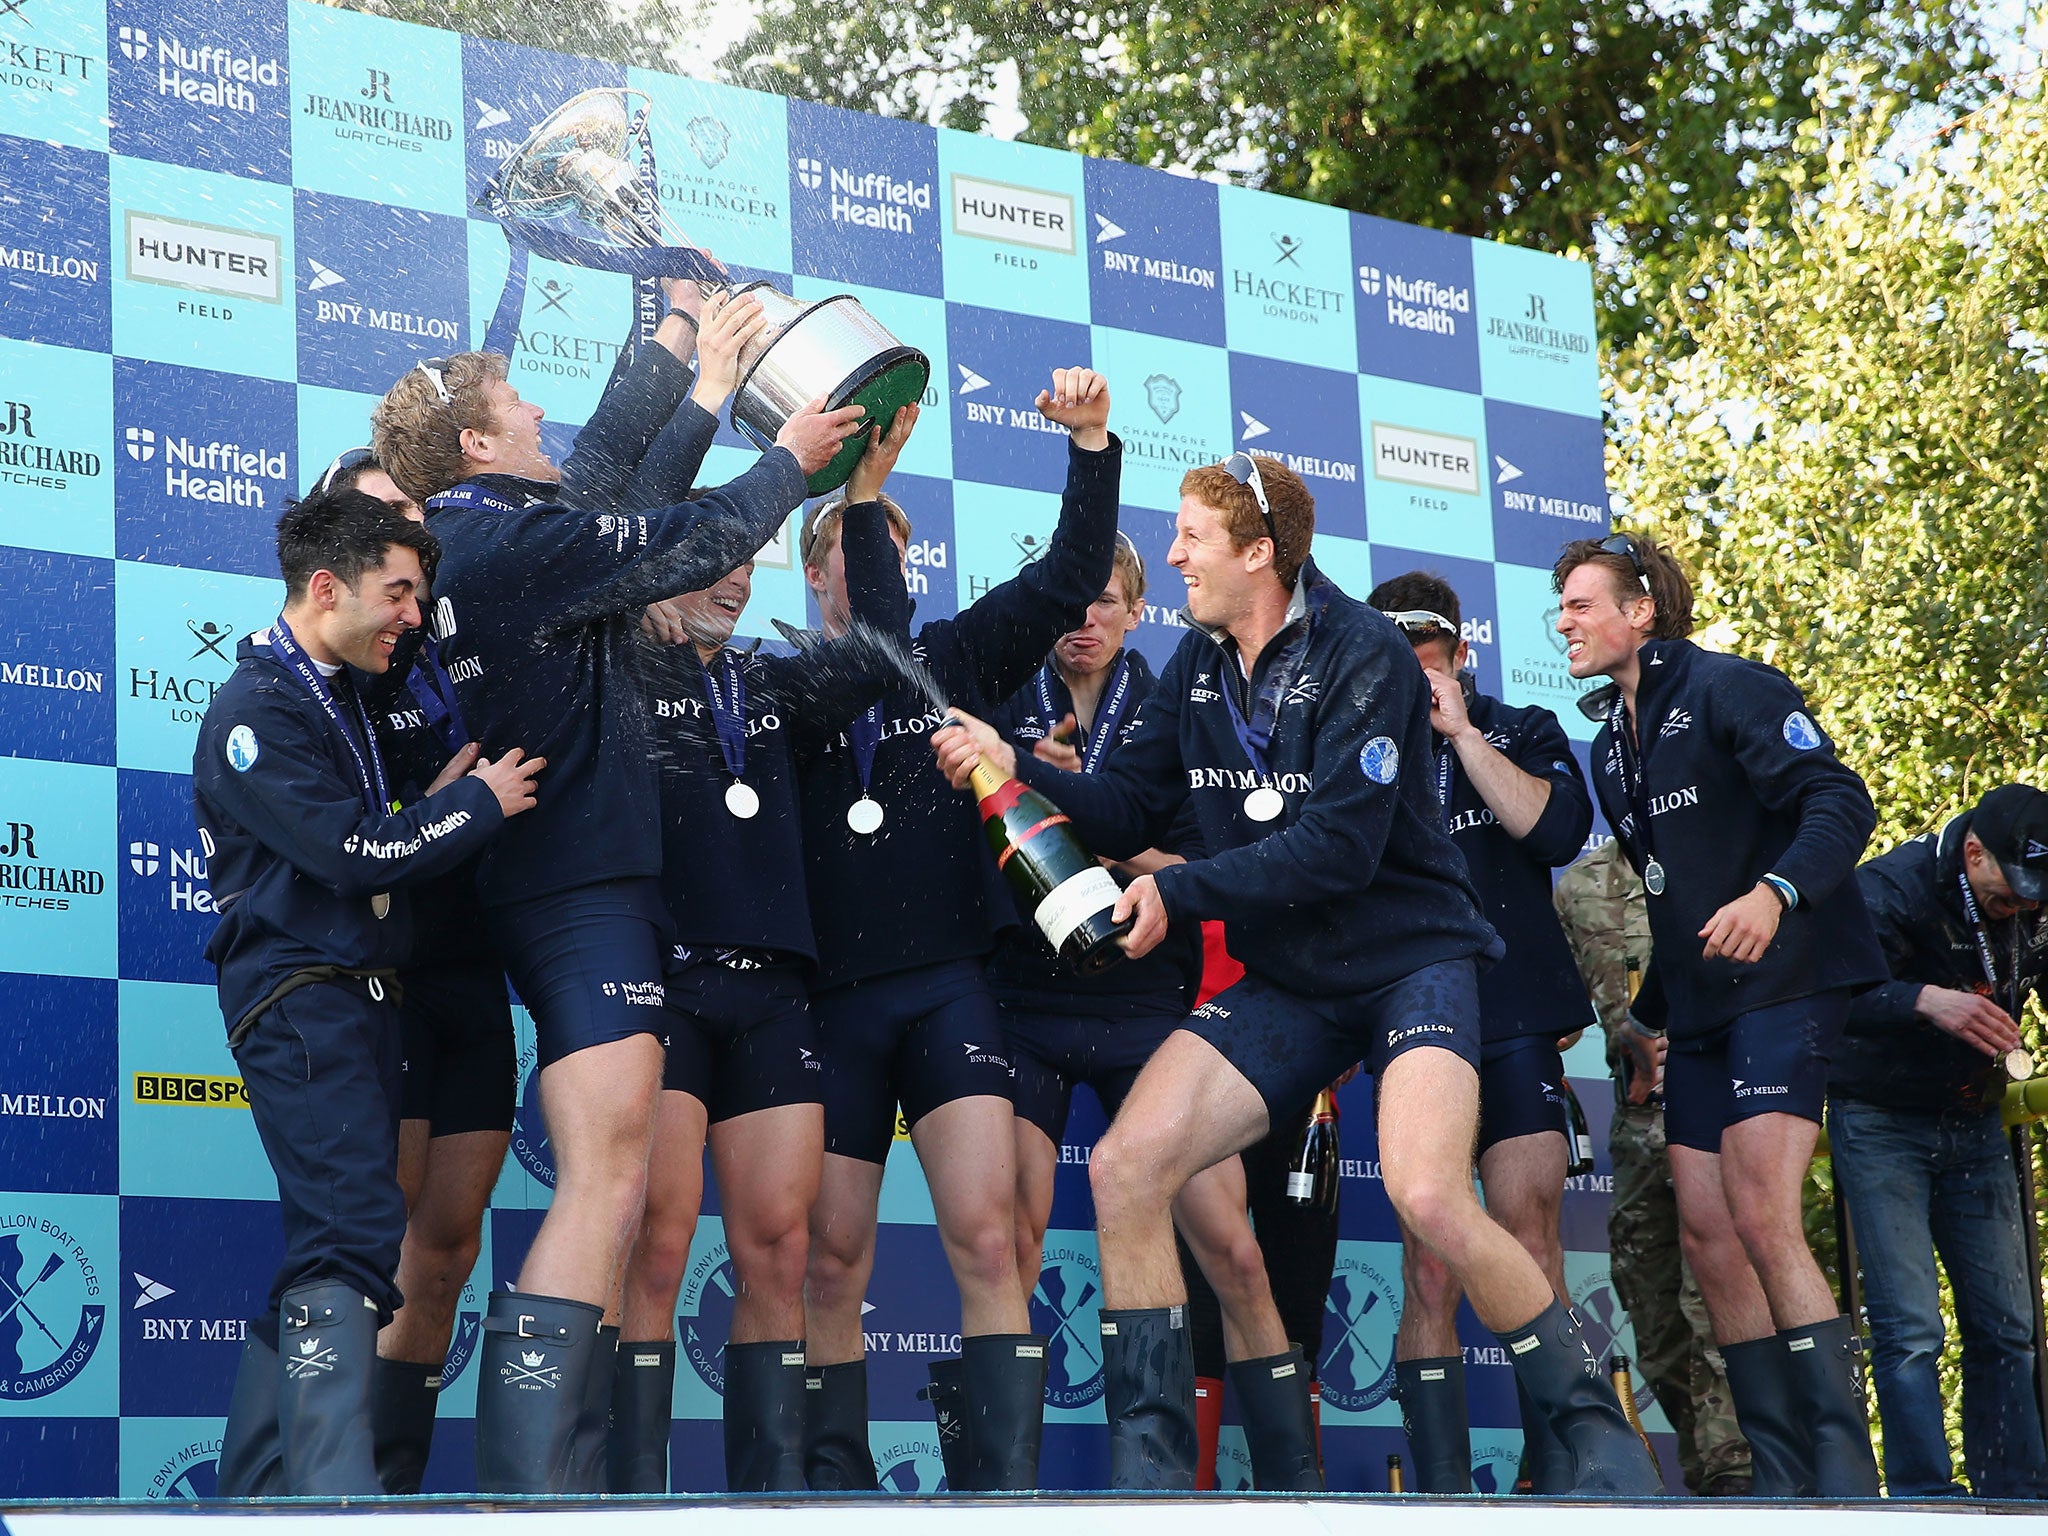 The Men's Oxford Boat Race crew celebrate their victory over Cambridge